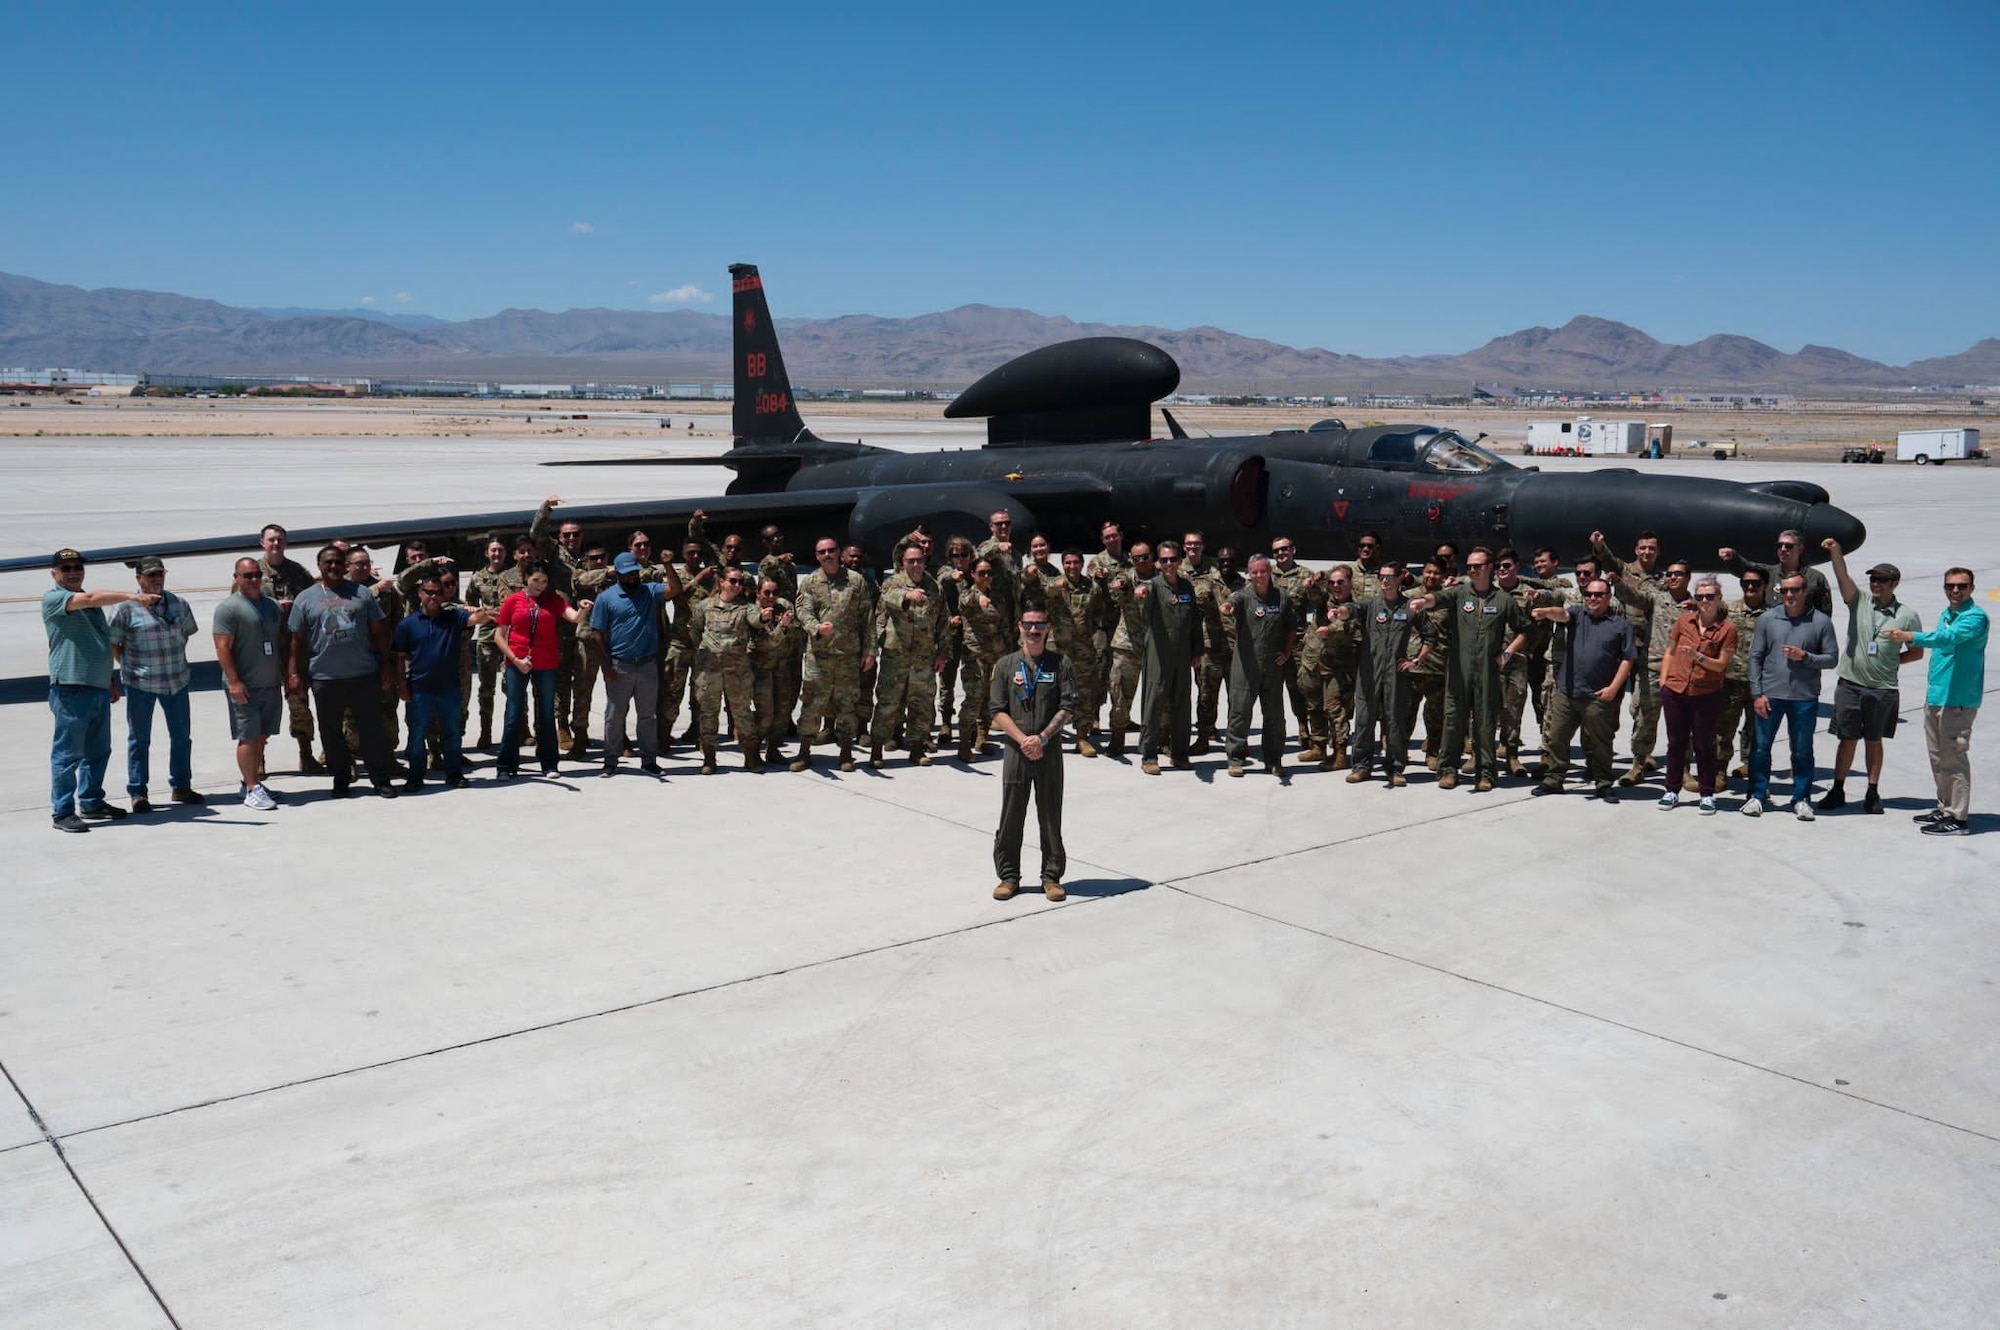 Group photo in front of U-2.